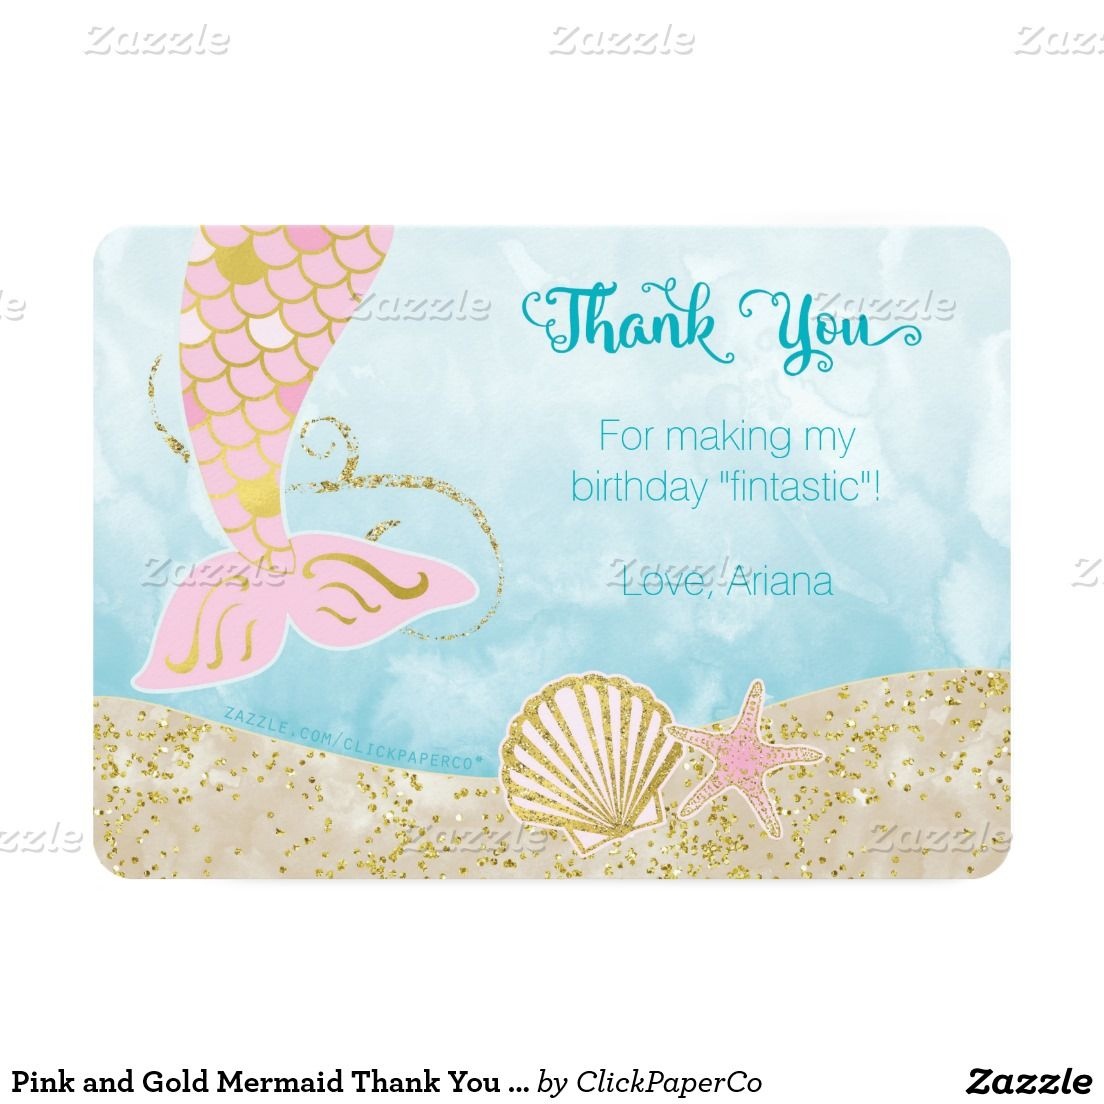 Pink And Gold Mermaid Thank You Card | Zazzle In 2019 | Mermaid - Free Printable Mermaid Thank You Cards